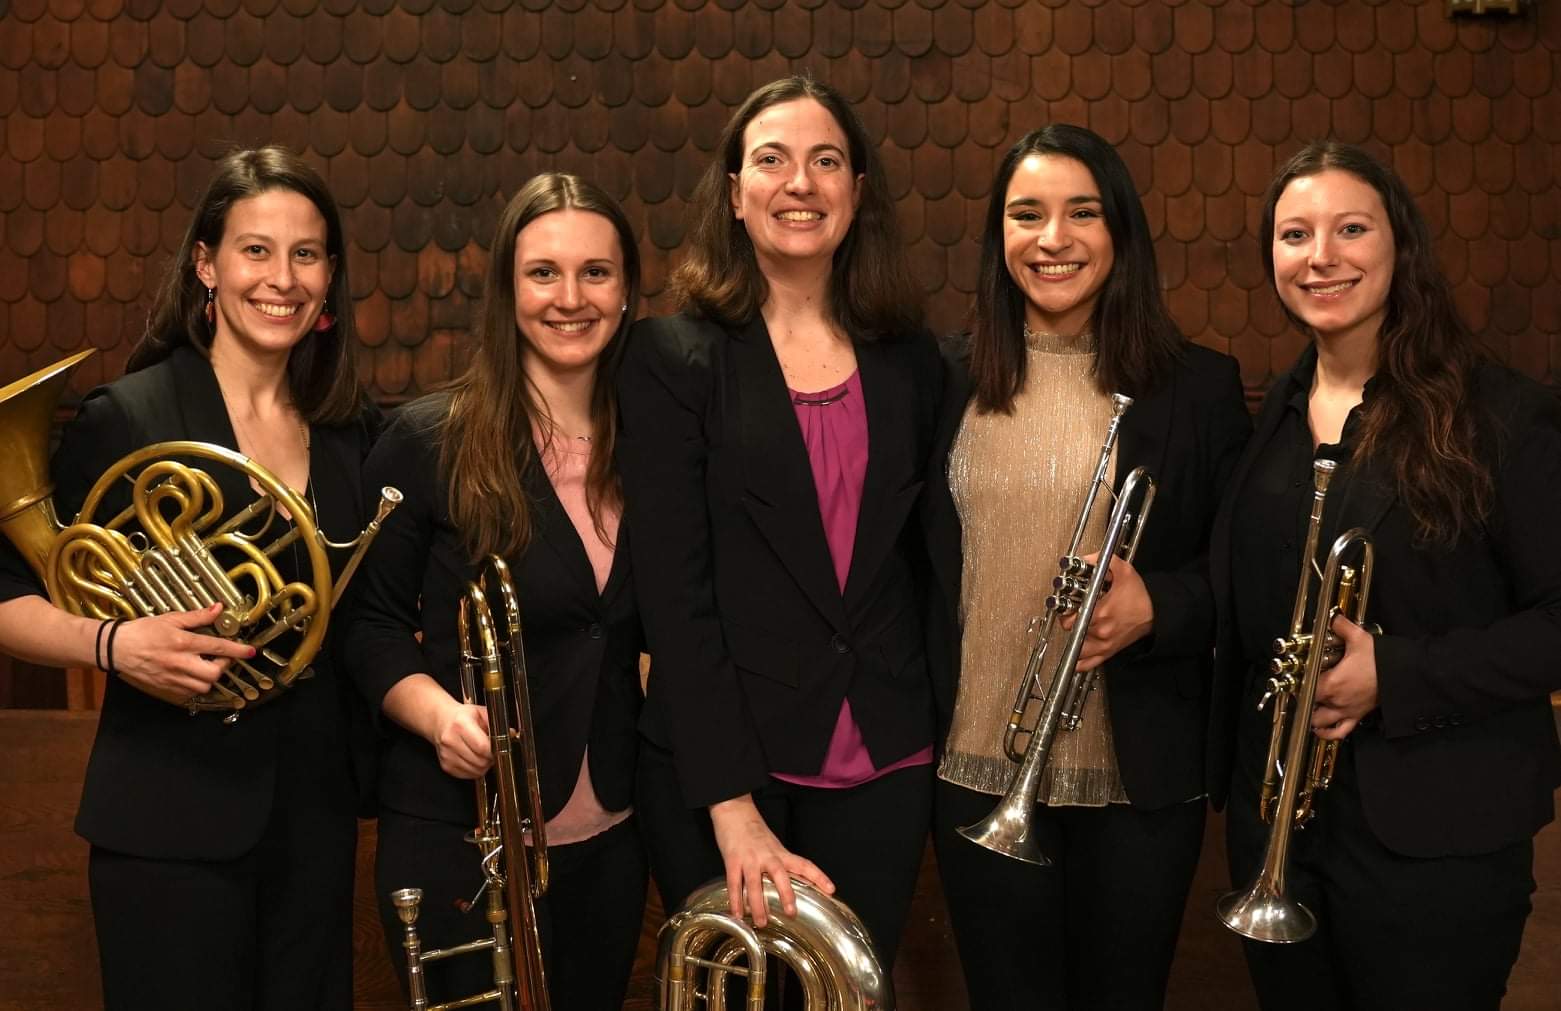 five women musicians pose with instruments and smile for camera